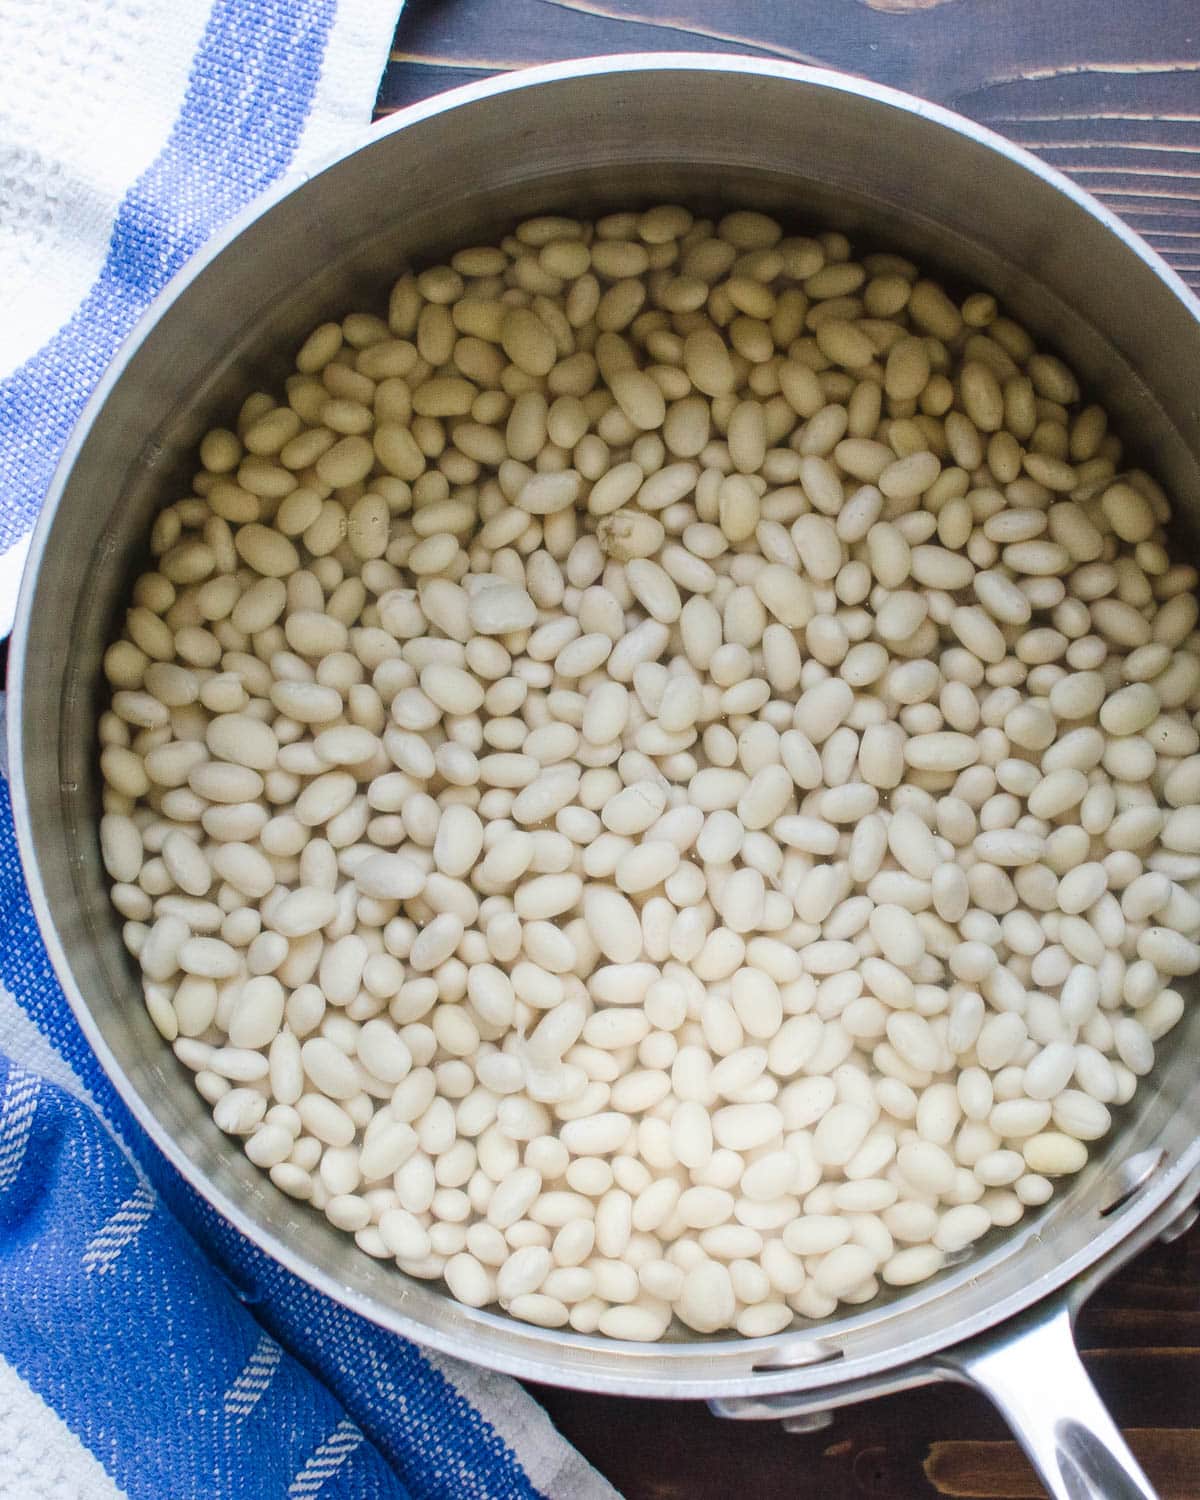 I am soaking white beans in water.